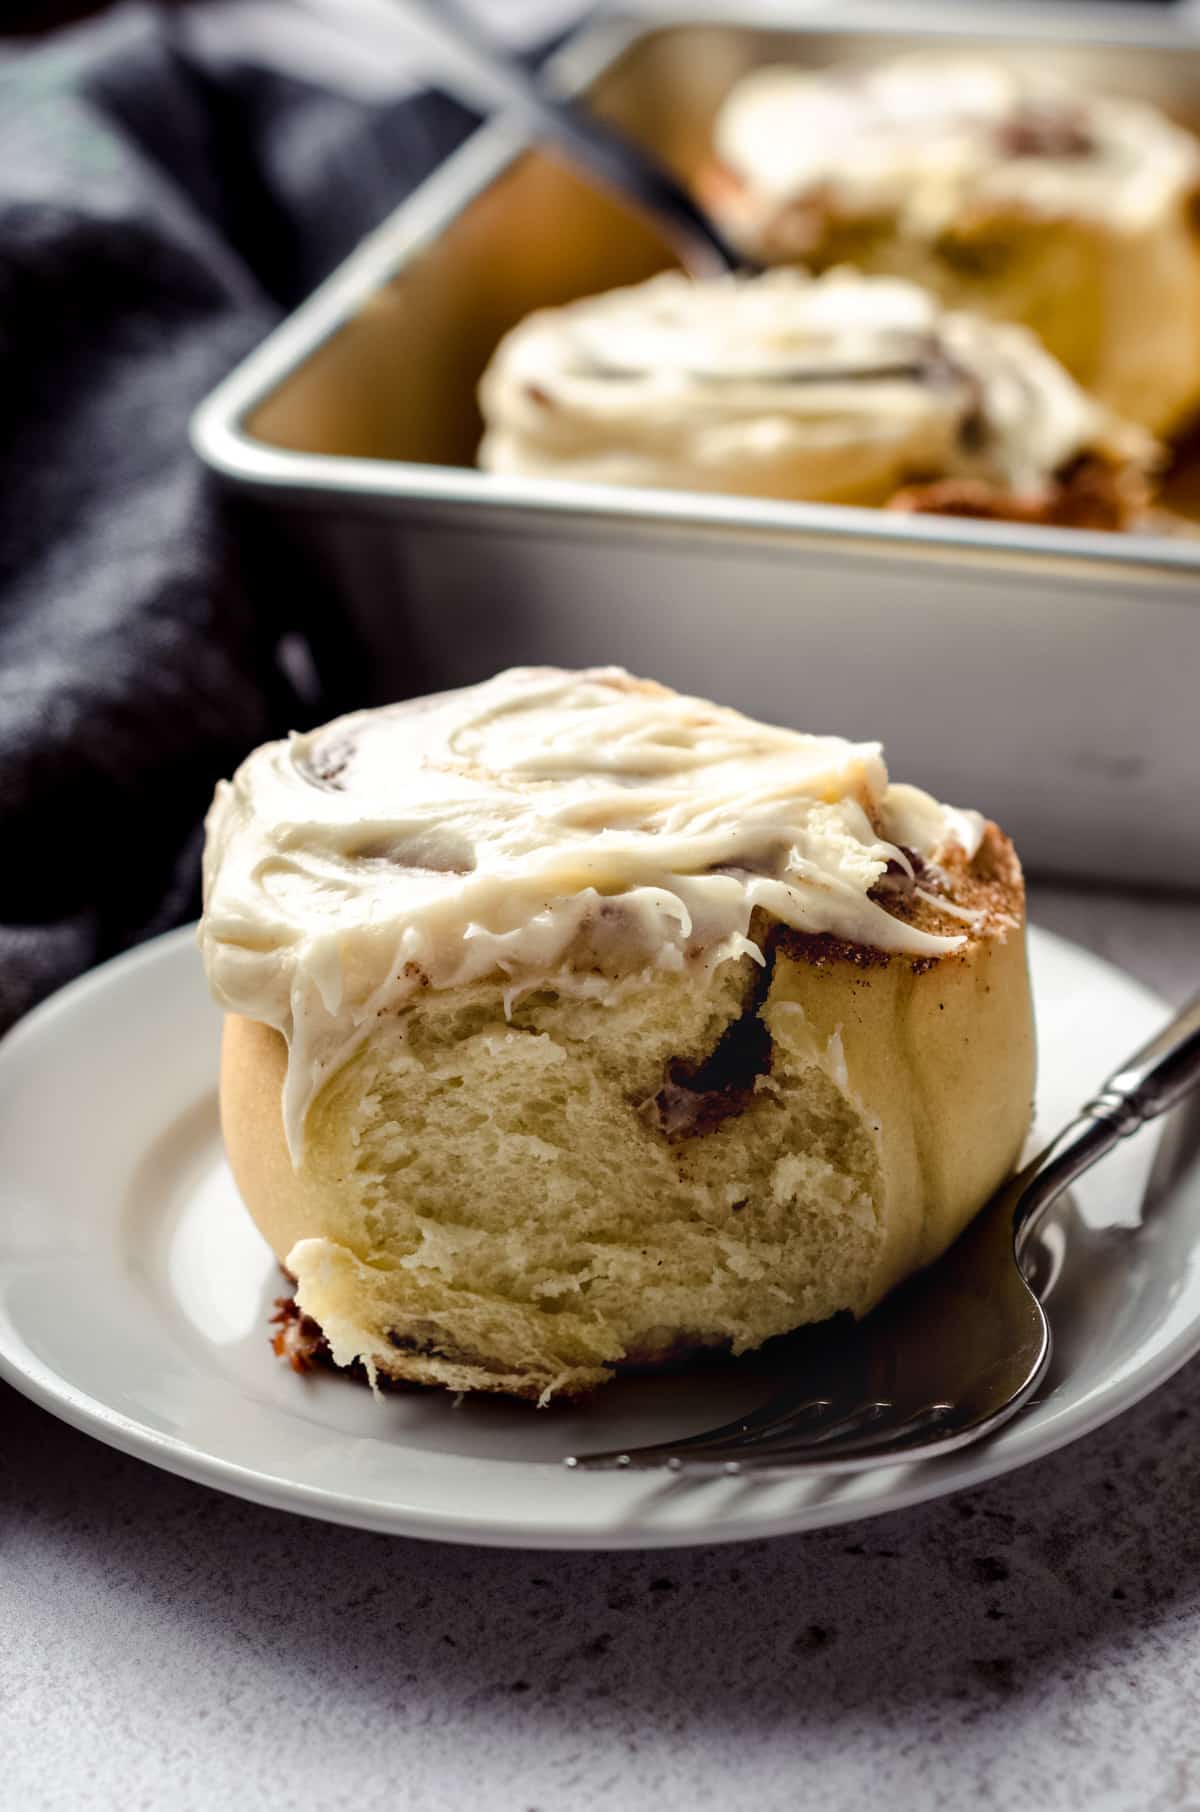 Cinnamon roll sitting on a plate with a fork.